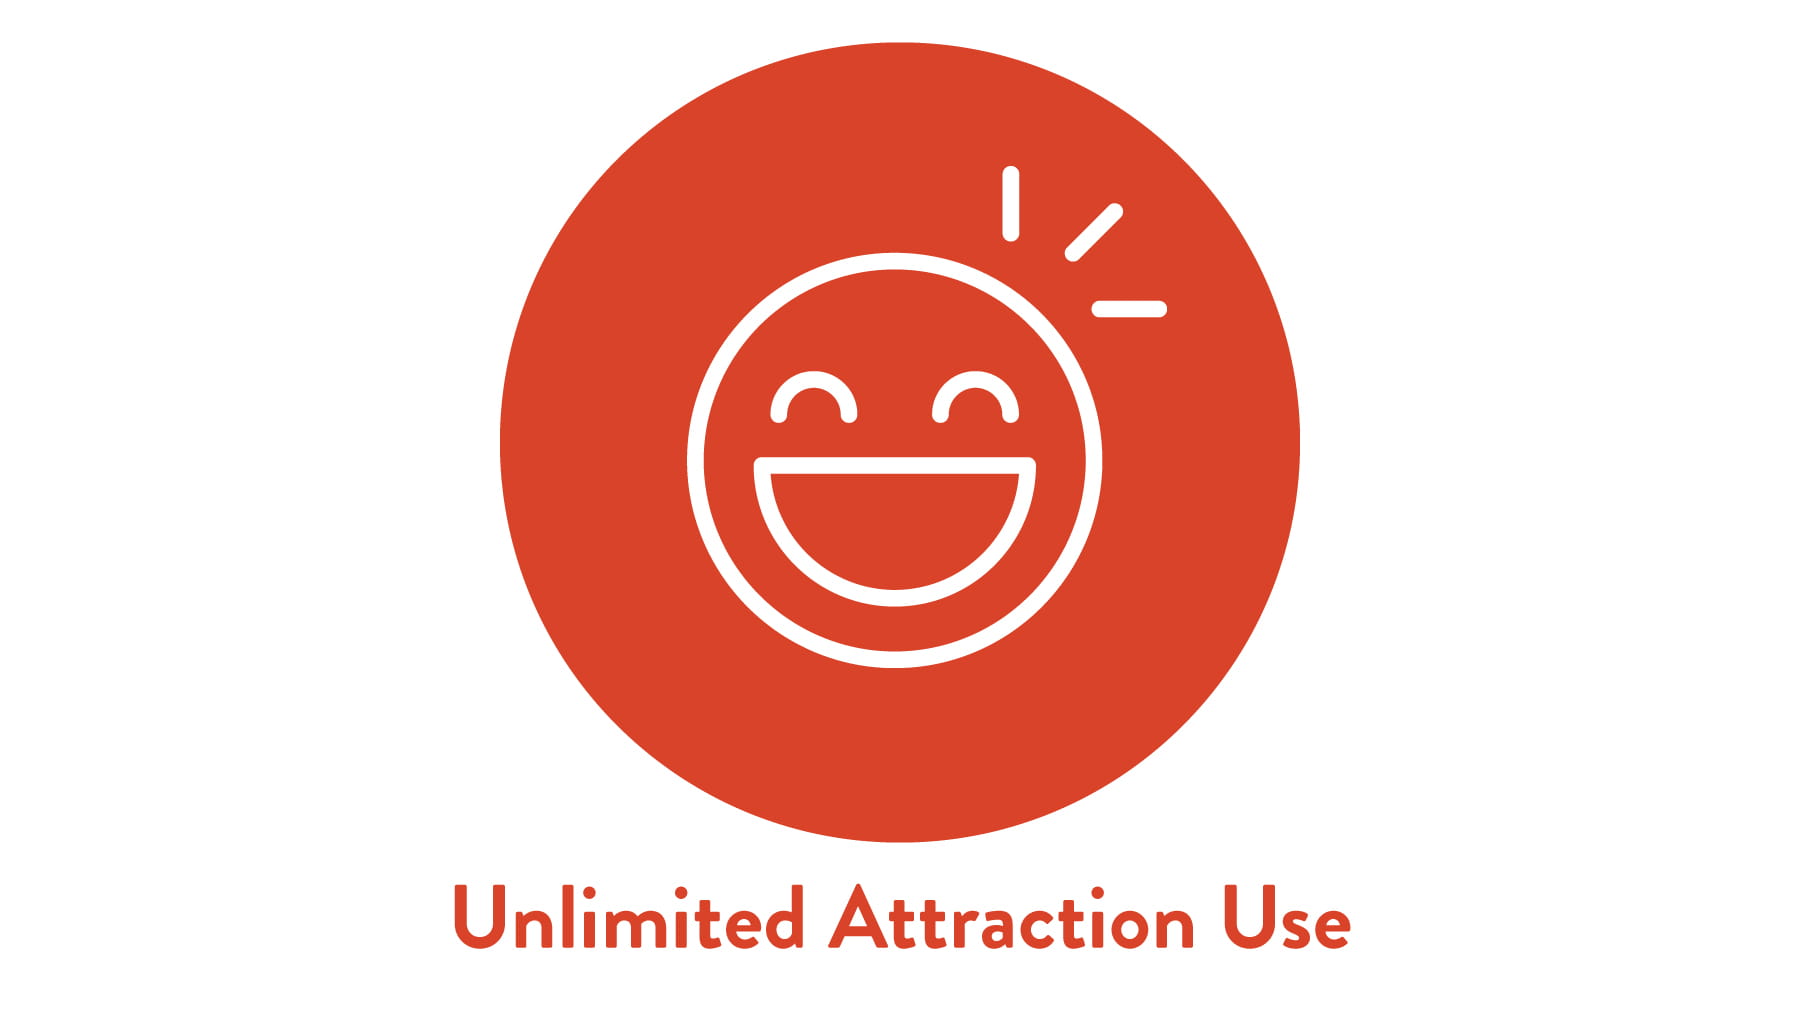 Unlimited Attraction Use